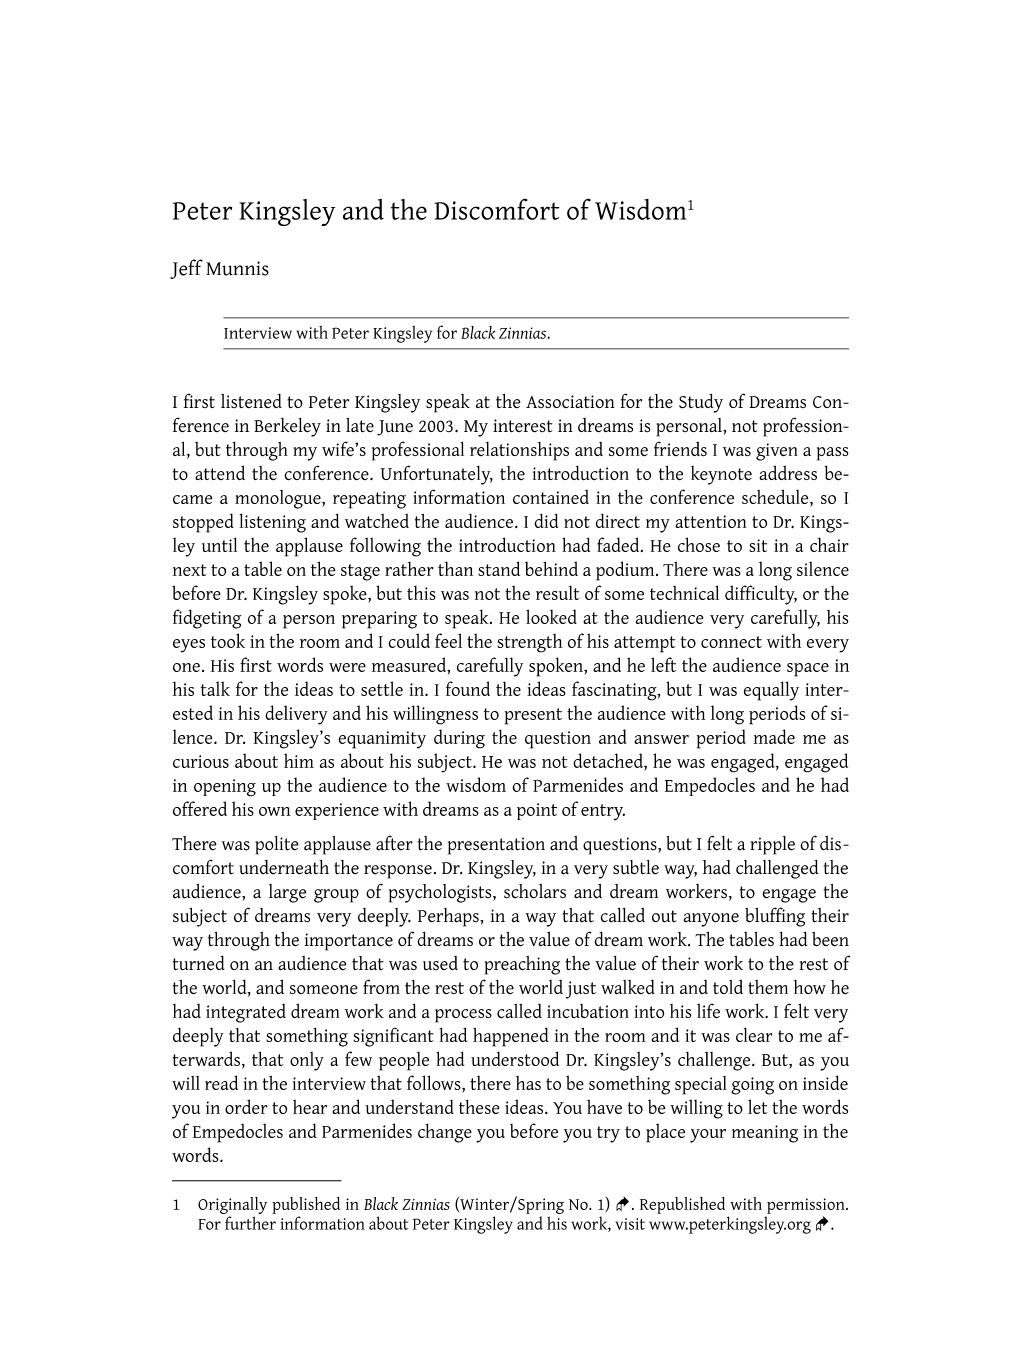 Peter Kingsley and the Discomfort of Wisdom11